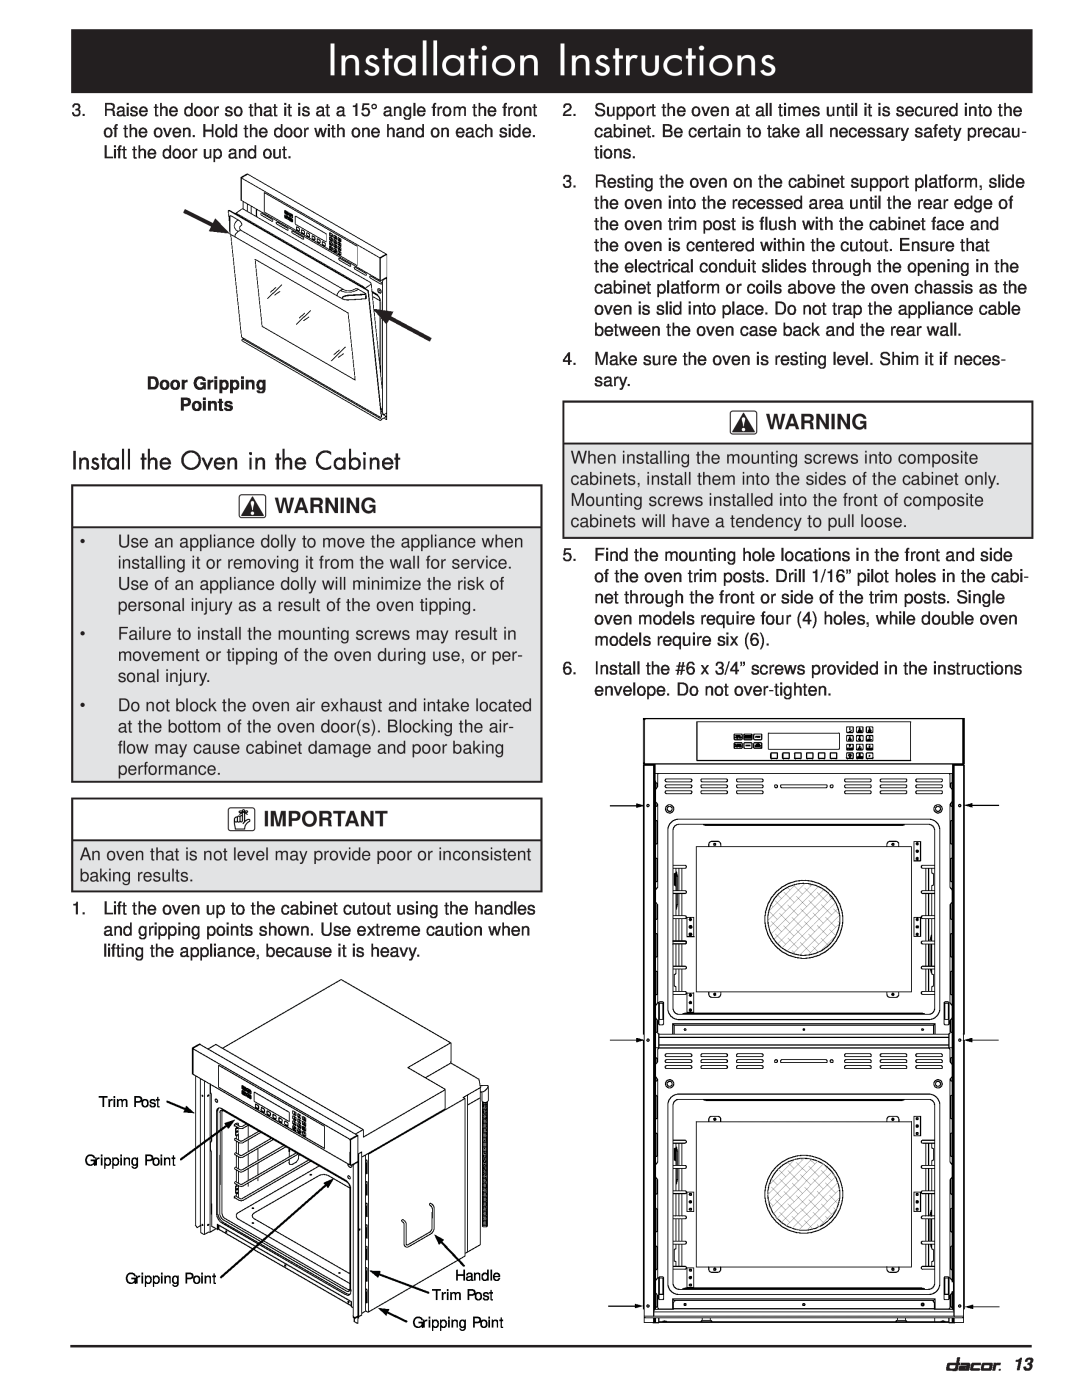 Dacor MO manual Install the Oven in the Cabinet, Installation Instructions, Door Gripping Points 